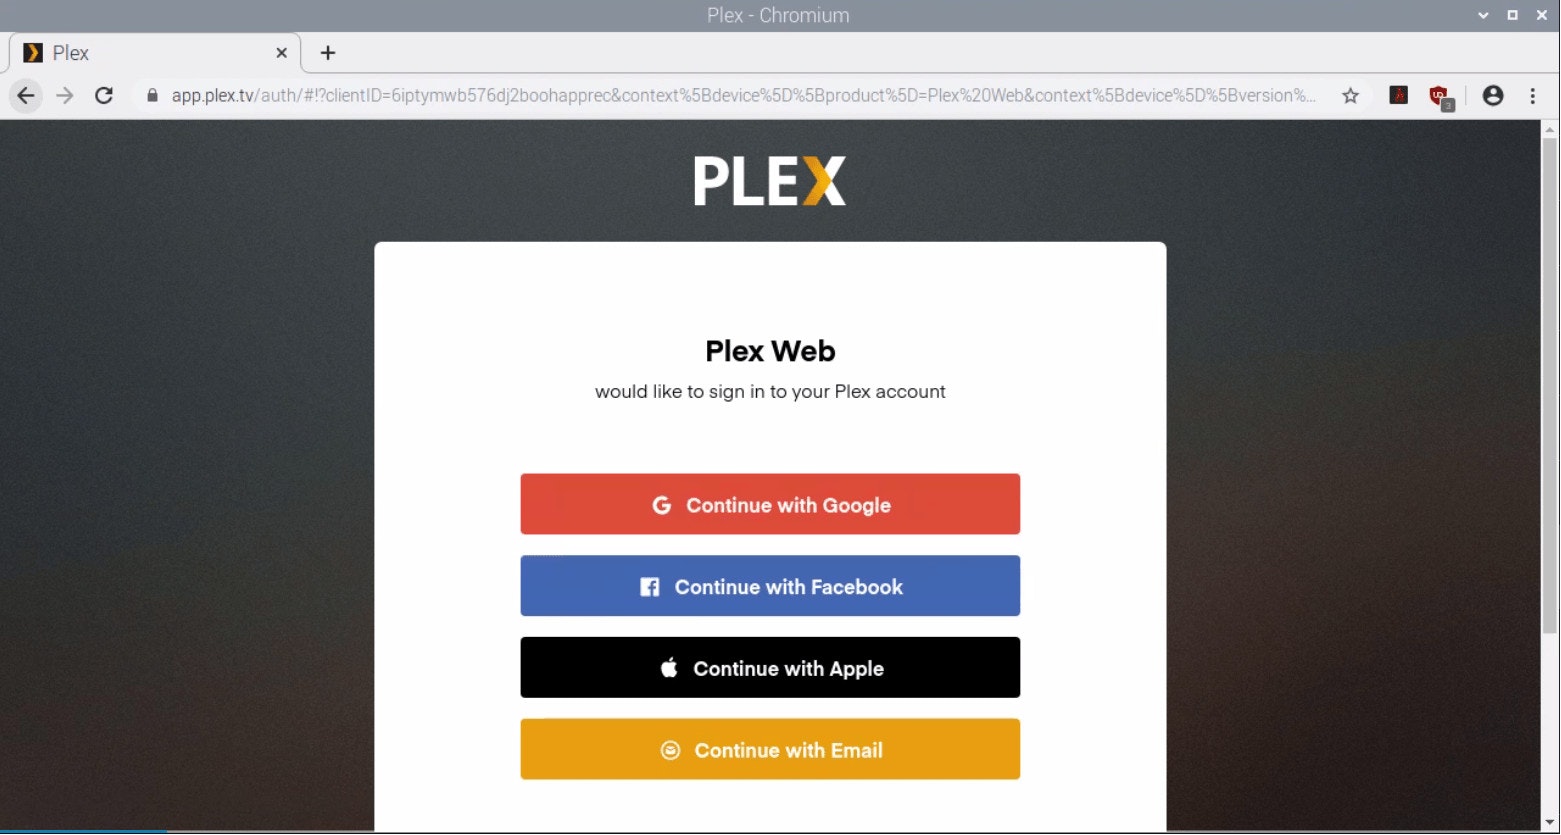 Browse Plex Service On The Browser